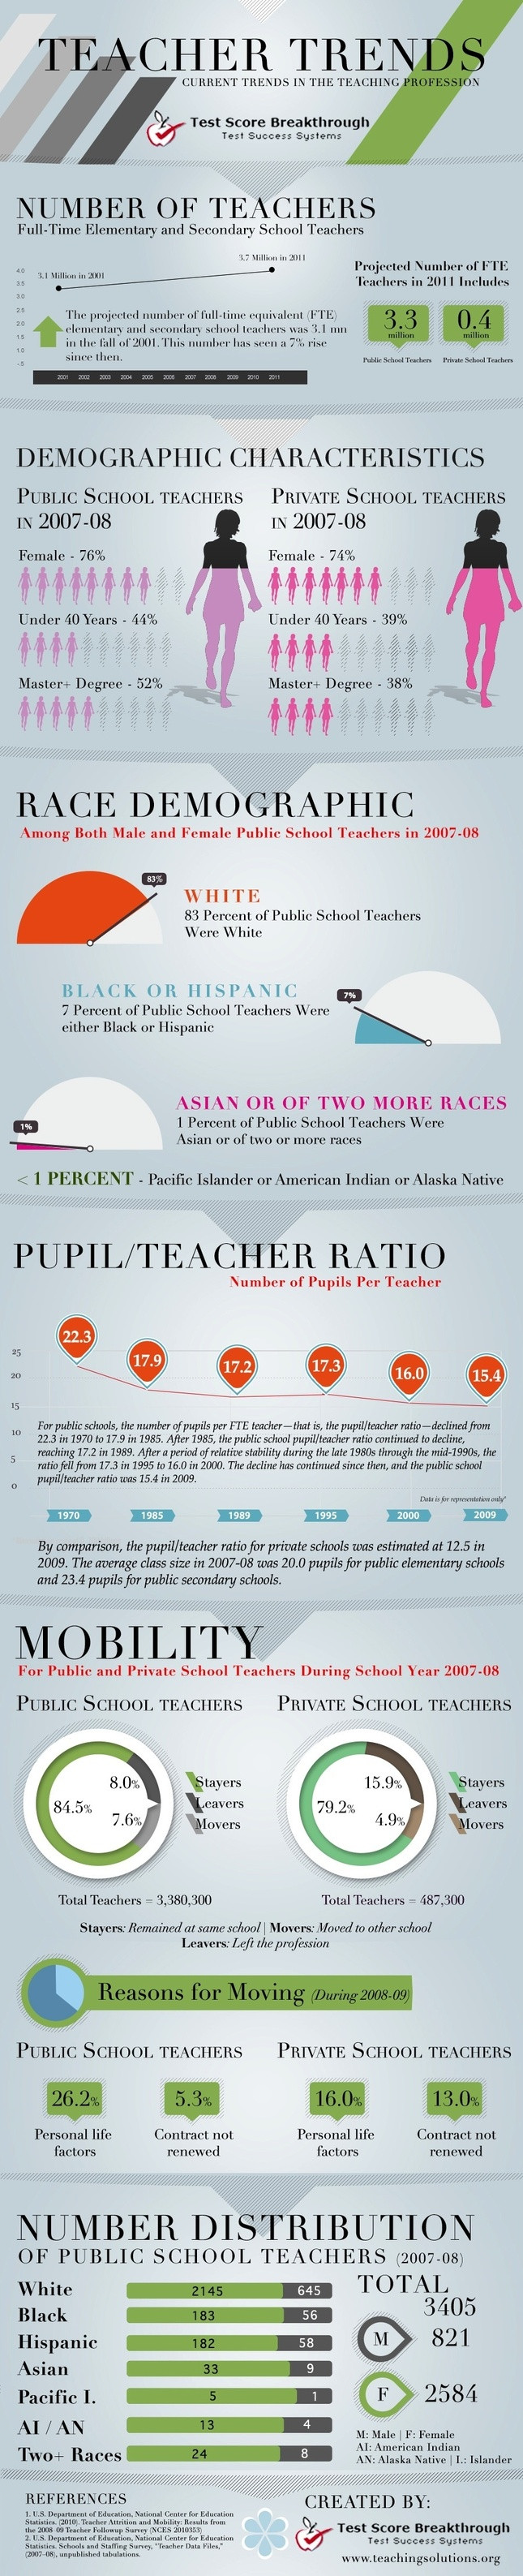 Current trends in teaching profession